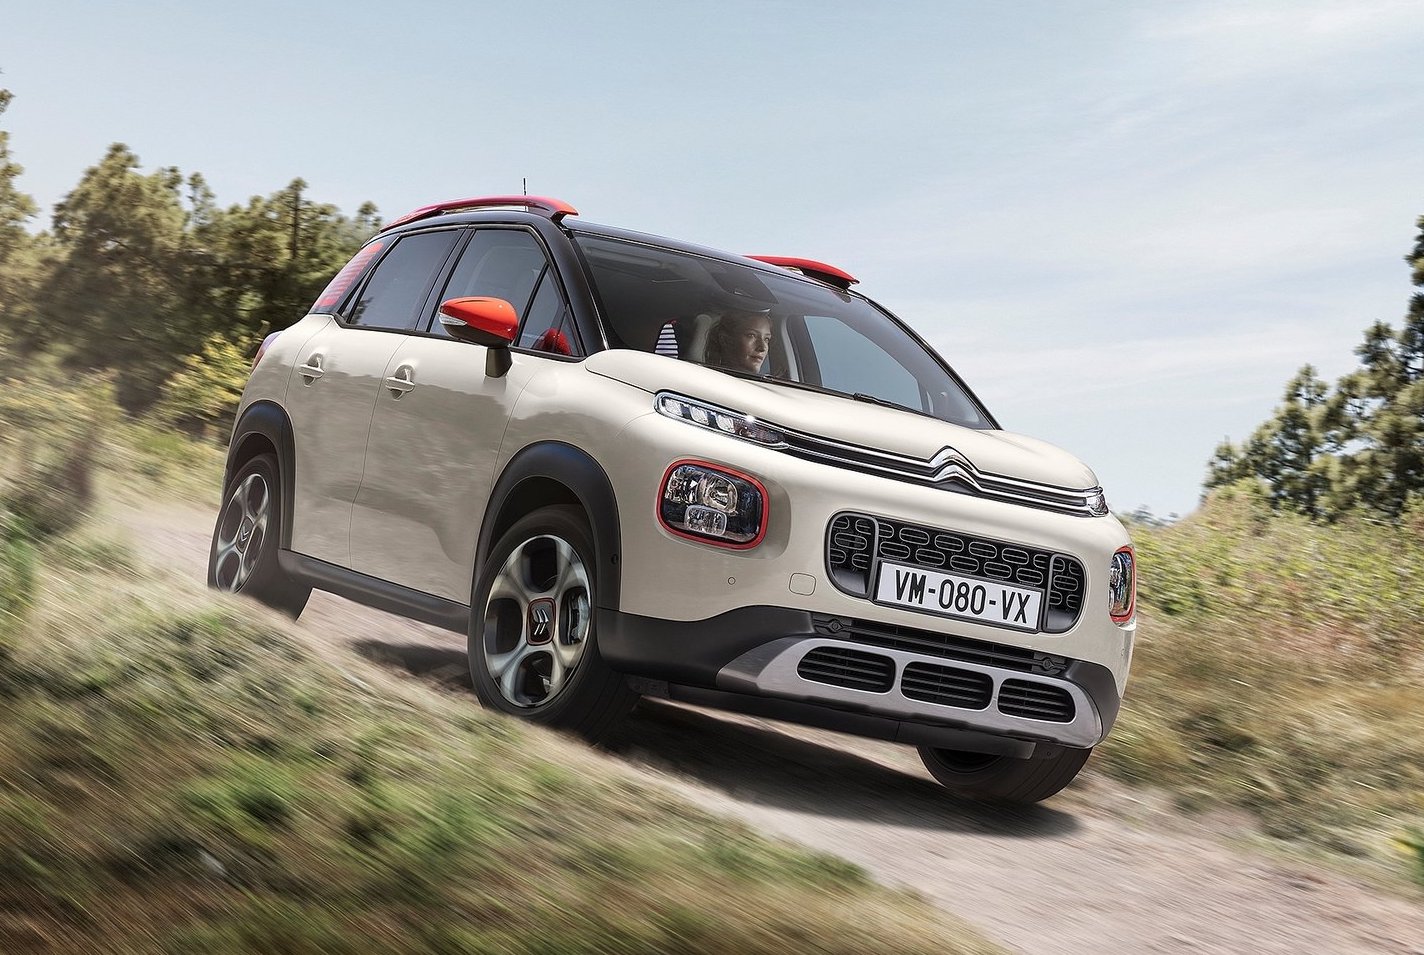 Citroen C3 Aircross unveiled, replaces C3 Picasso